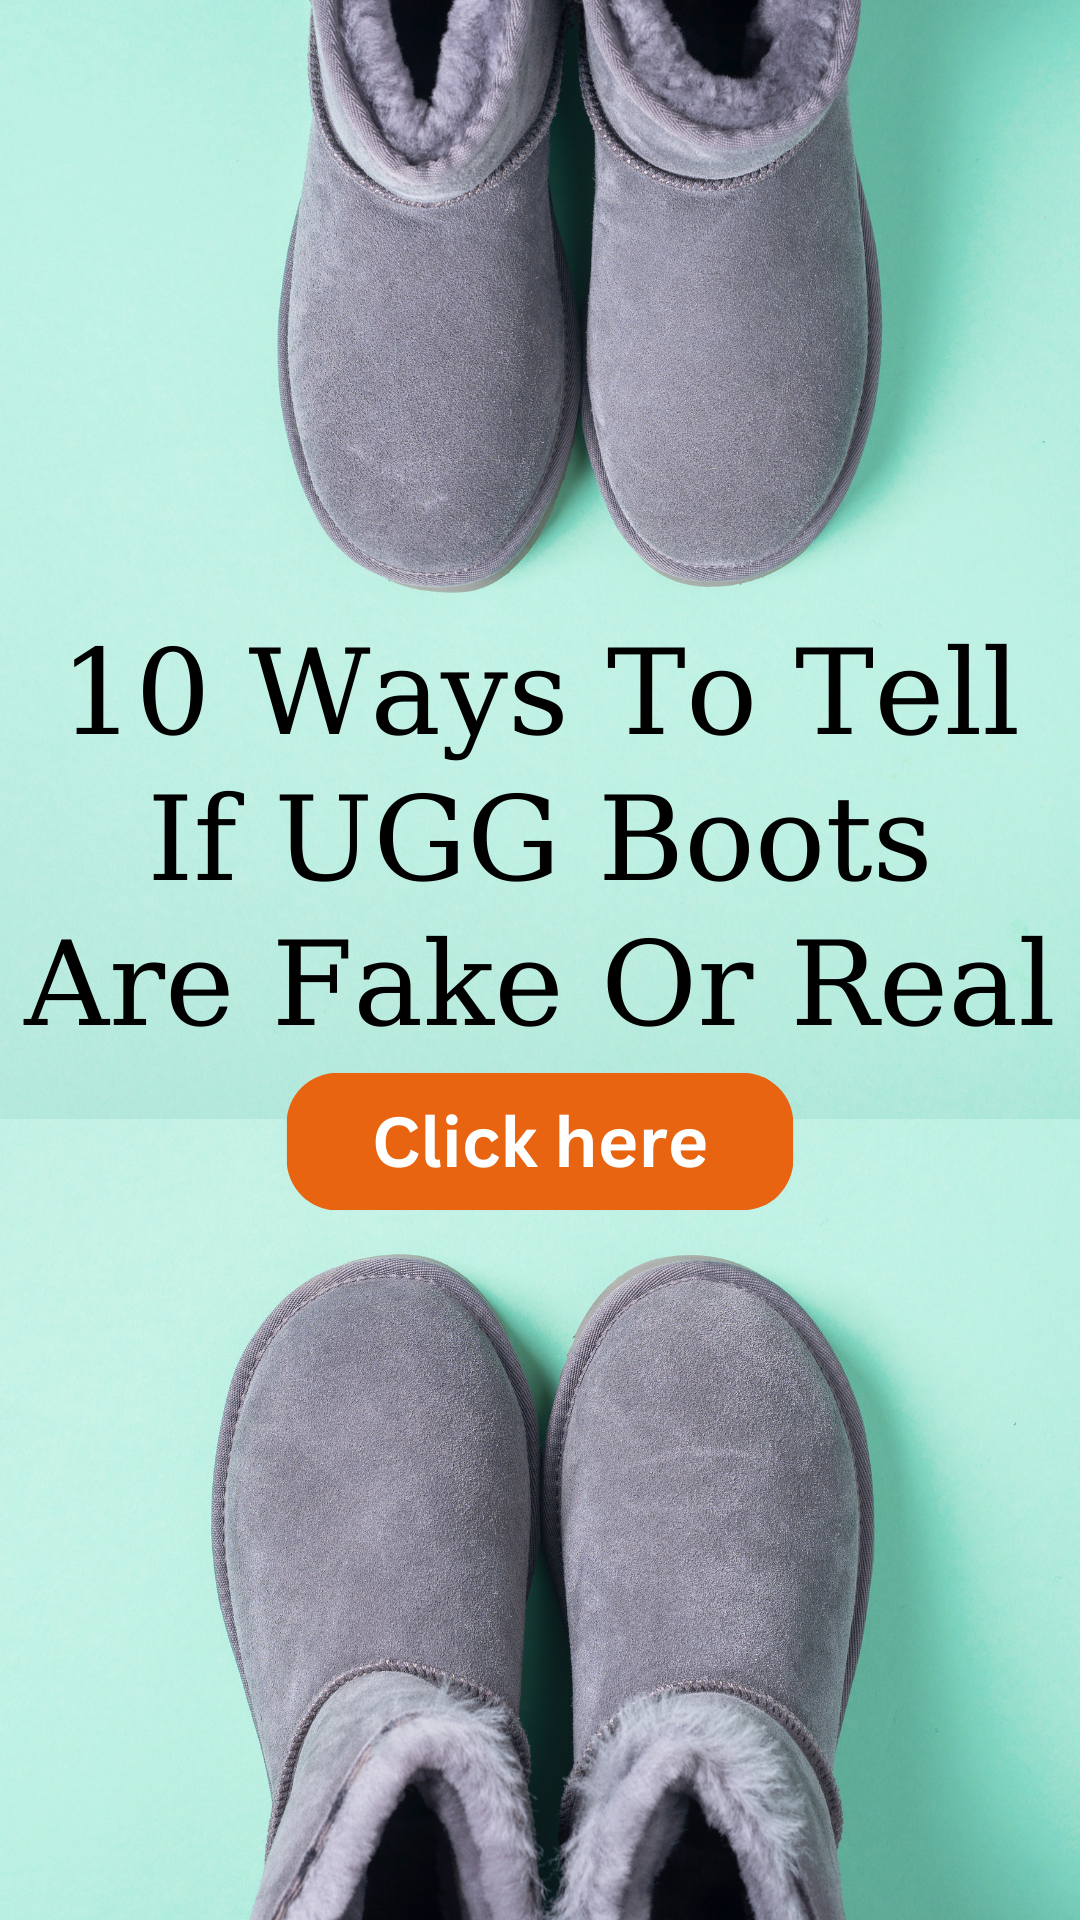 How To Tell If UGG Boots Are Fake Or Real